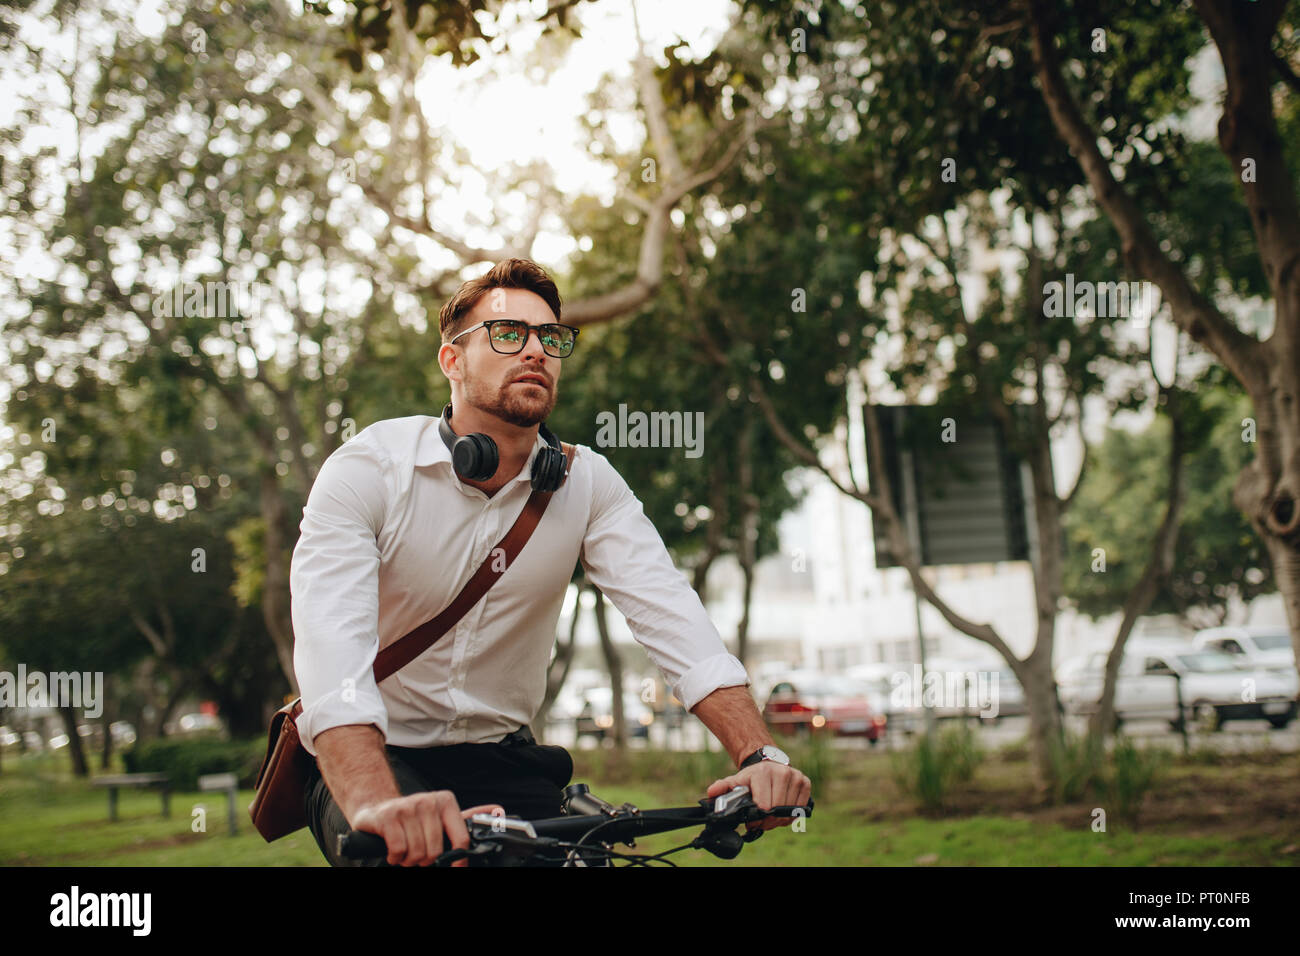 Health conscious man commuting to office on a bike. Man wearing office bag riding a bicycle. Stock Photo